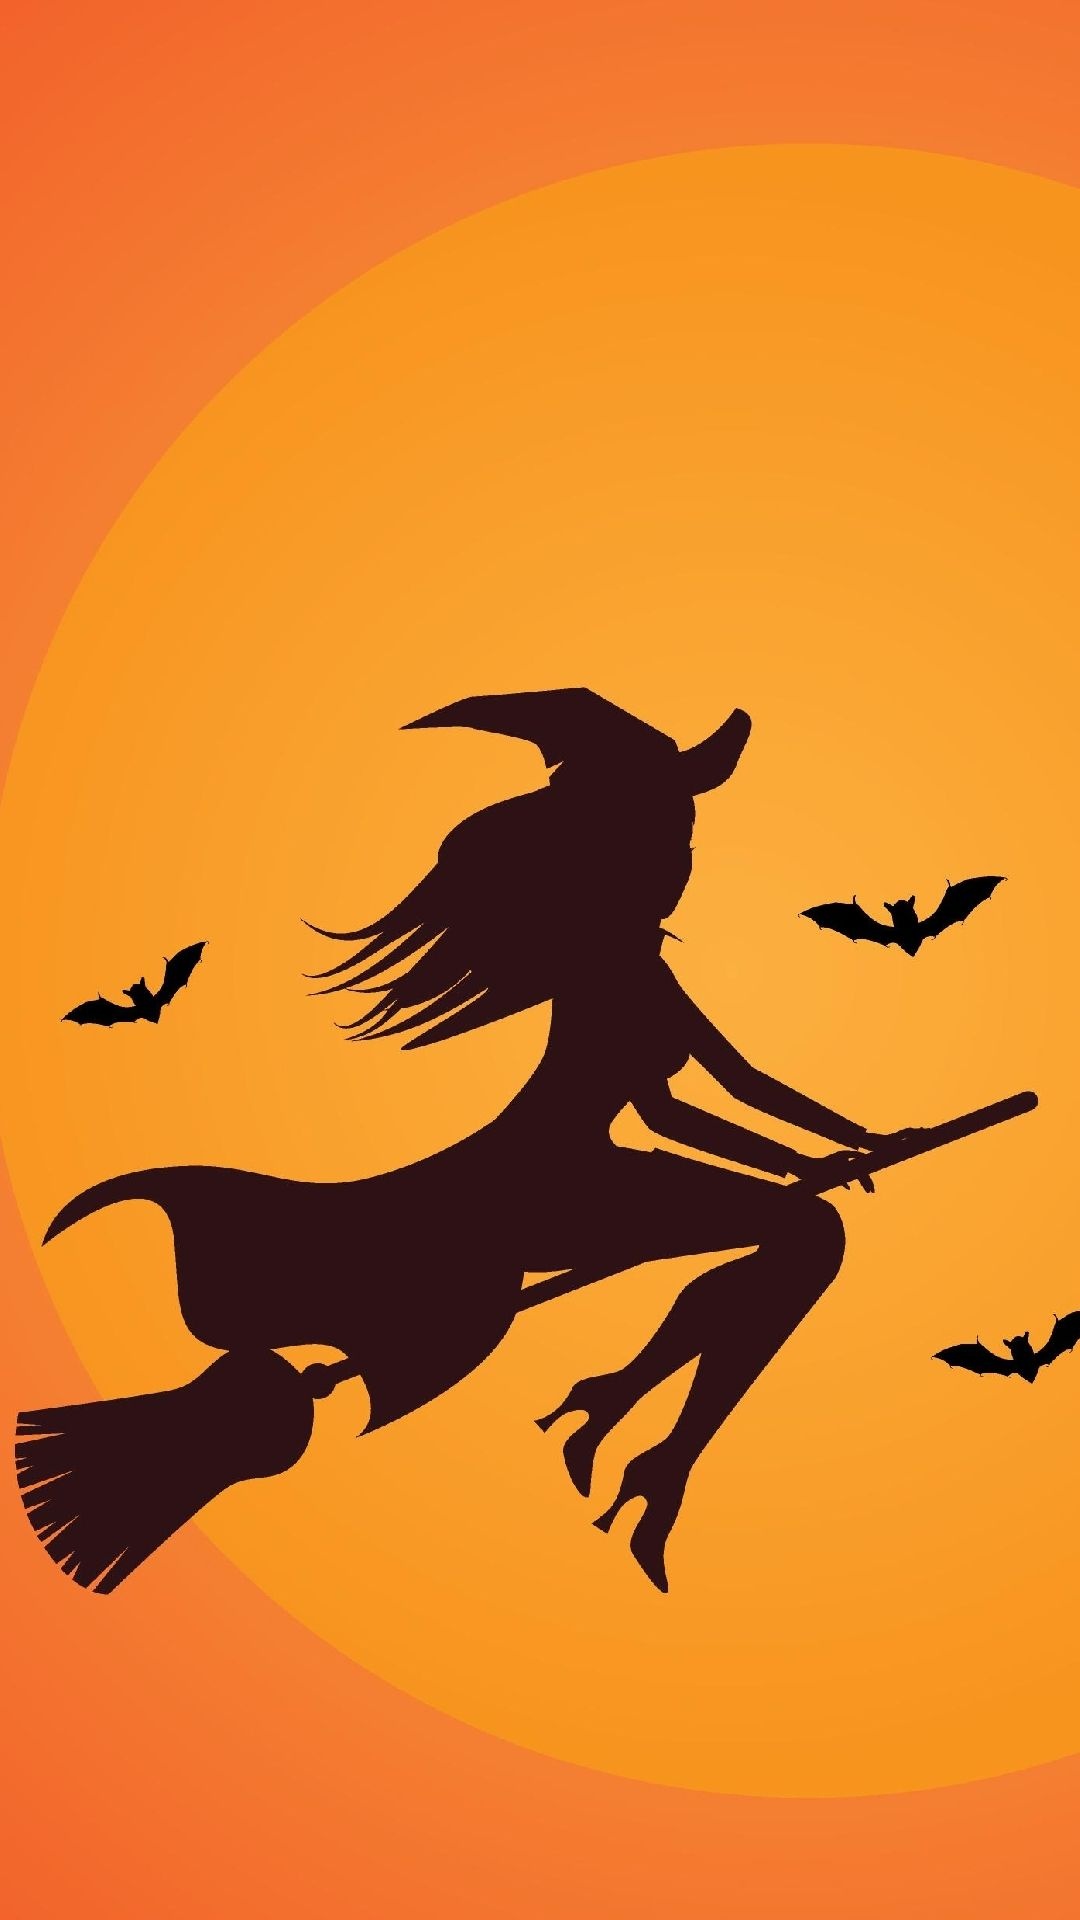 Halloween witch pin, Creative inspiration, Festive and spooky, Pinning it for later, 1080x1920 Full HD Phone